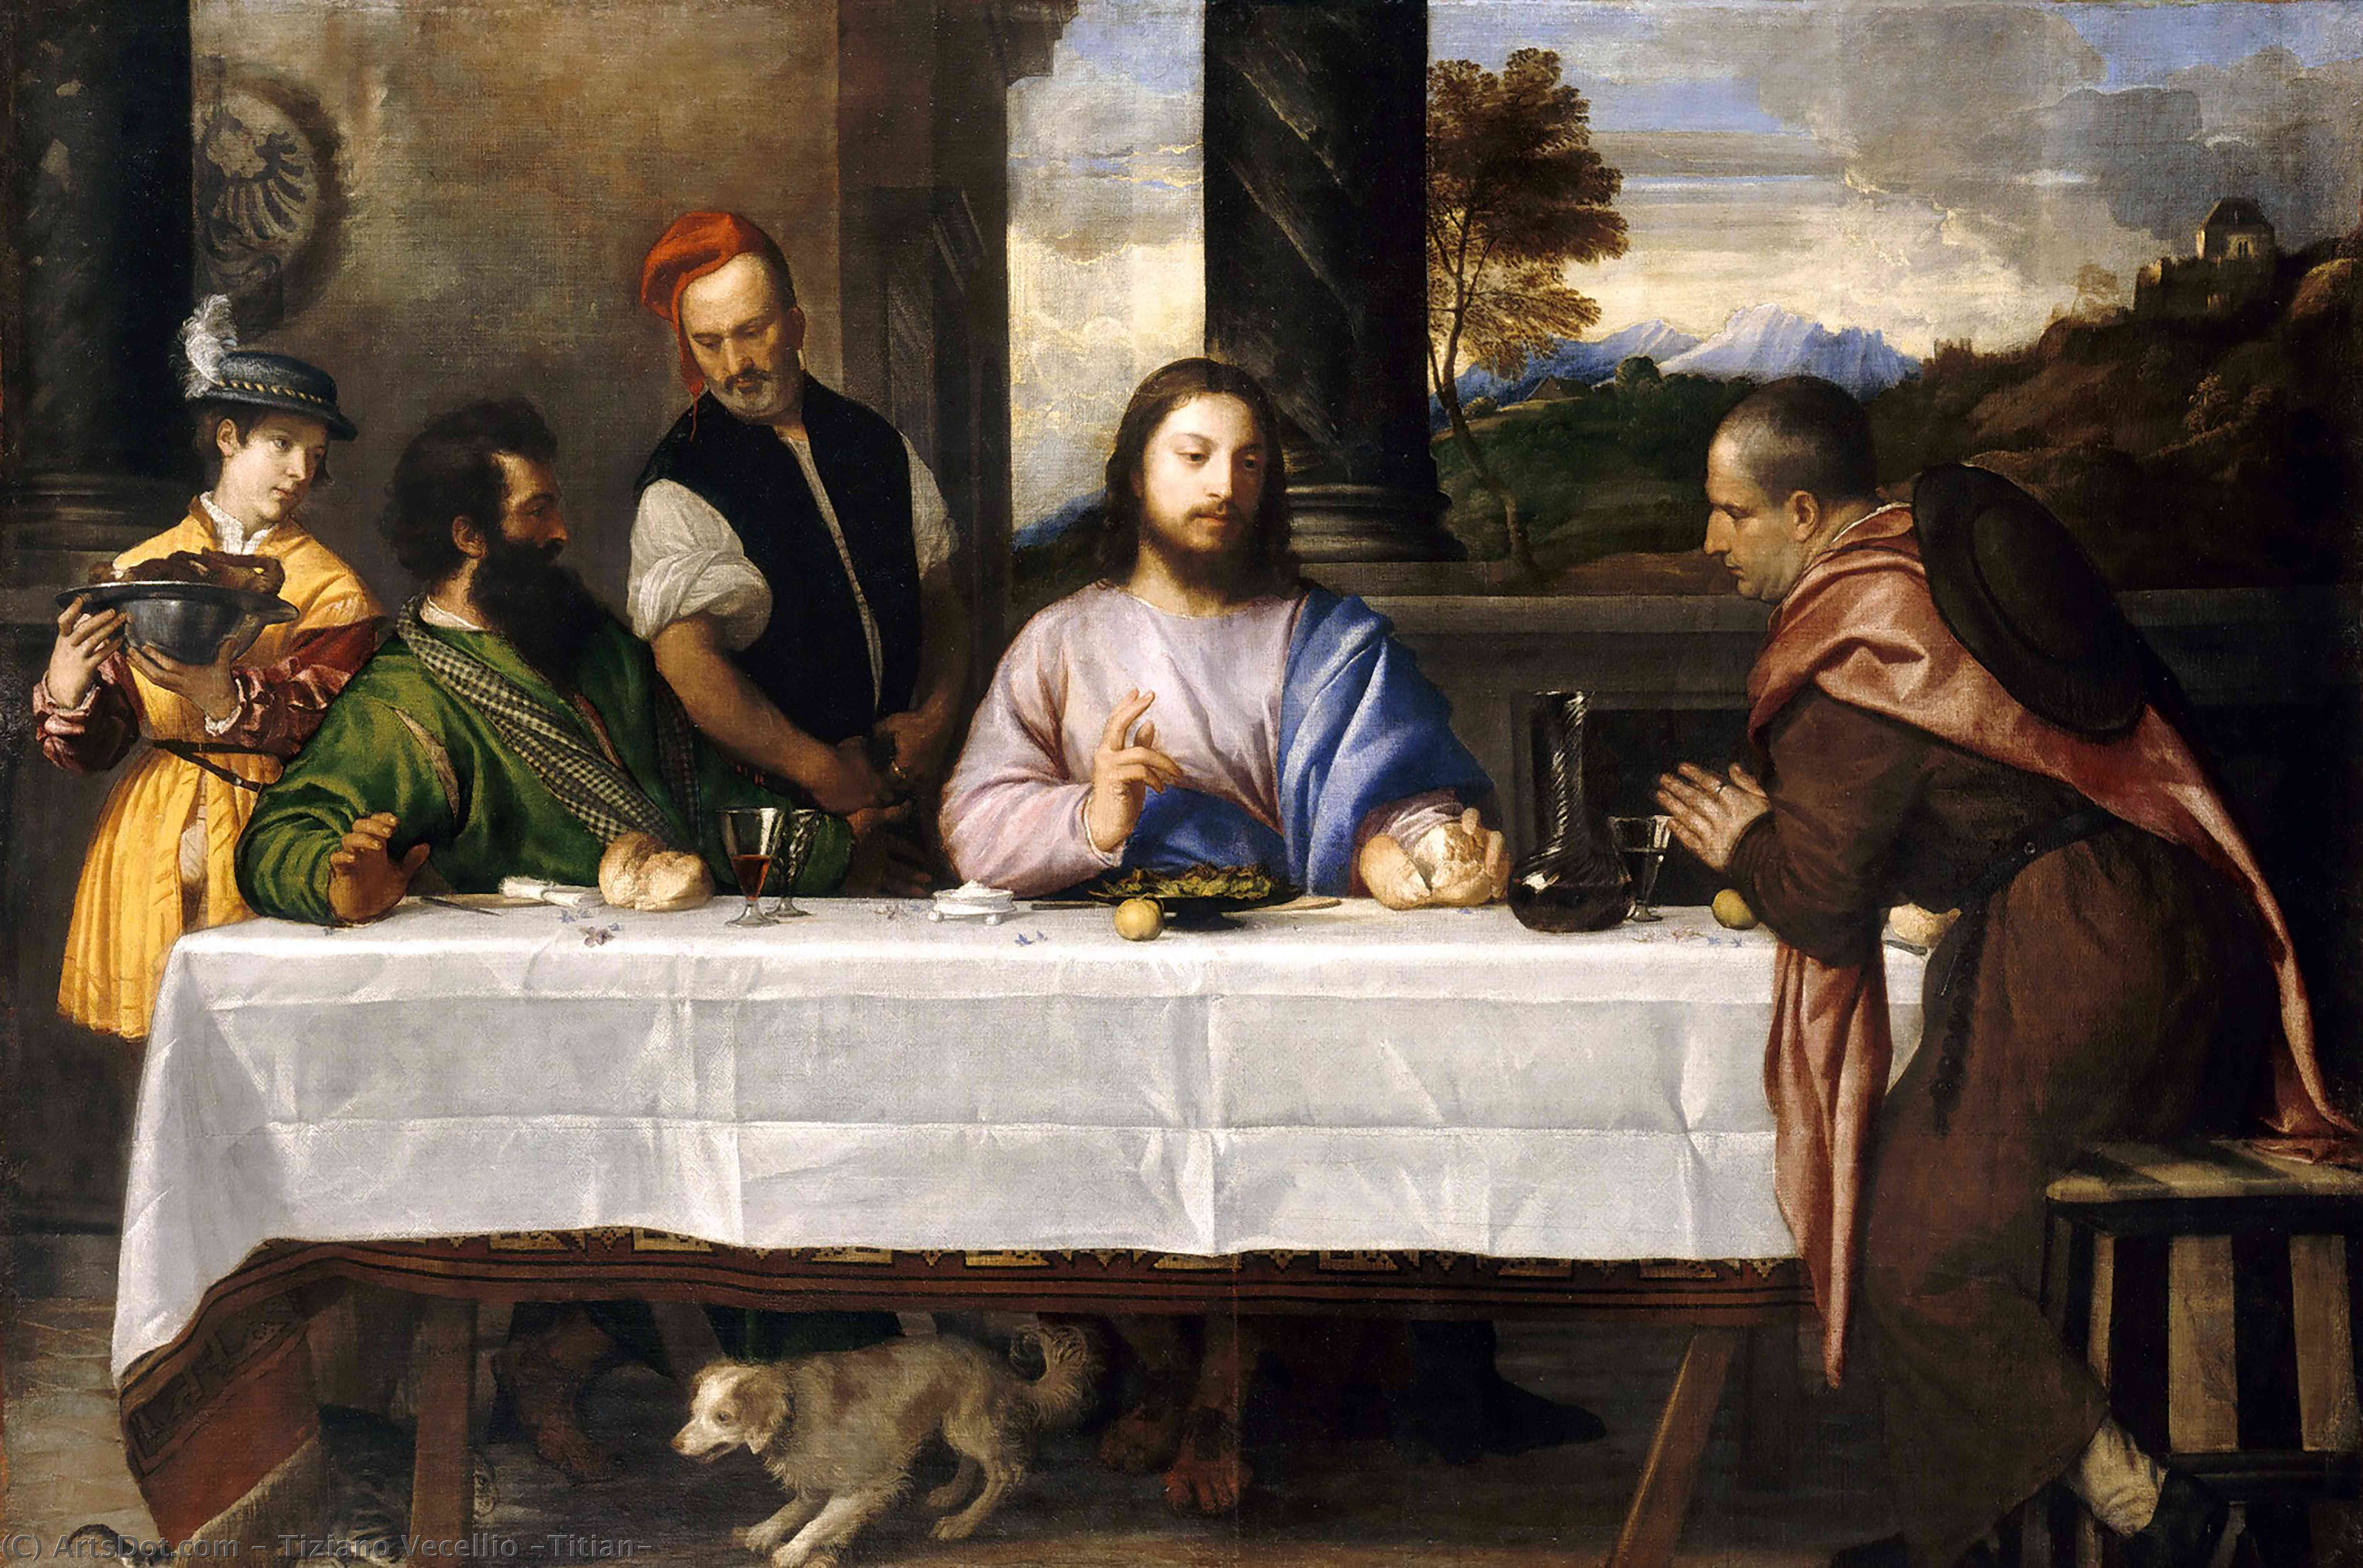 WikiOO.org - 백과 사전 - 회화, 삽화 Tiziano Vecellio (Titian) - The Supper at Emmaus